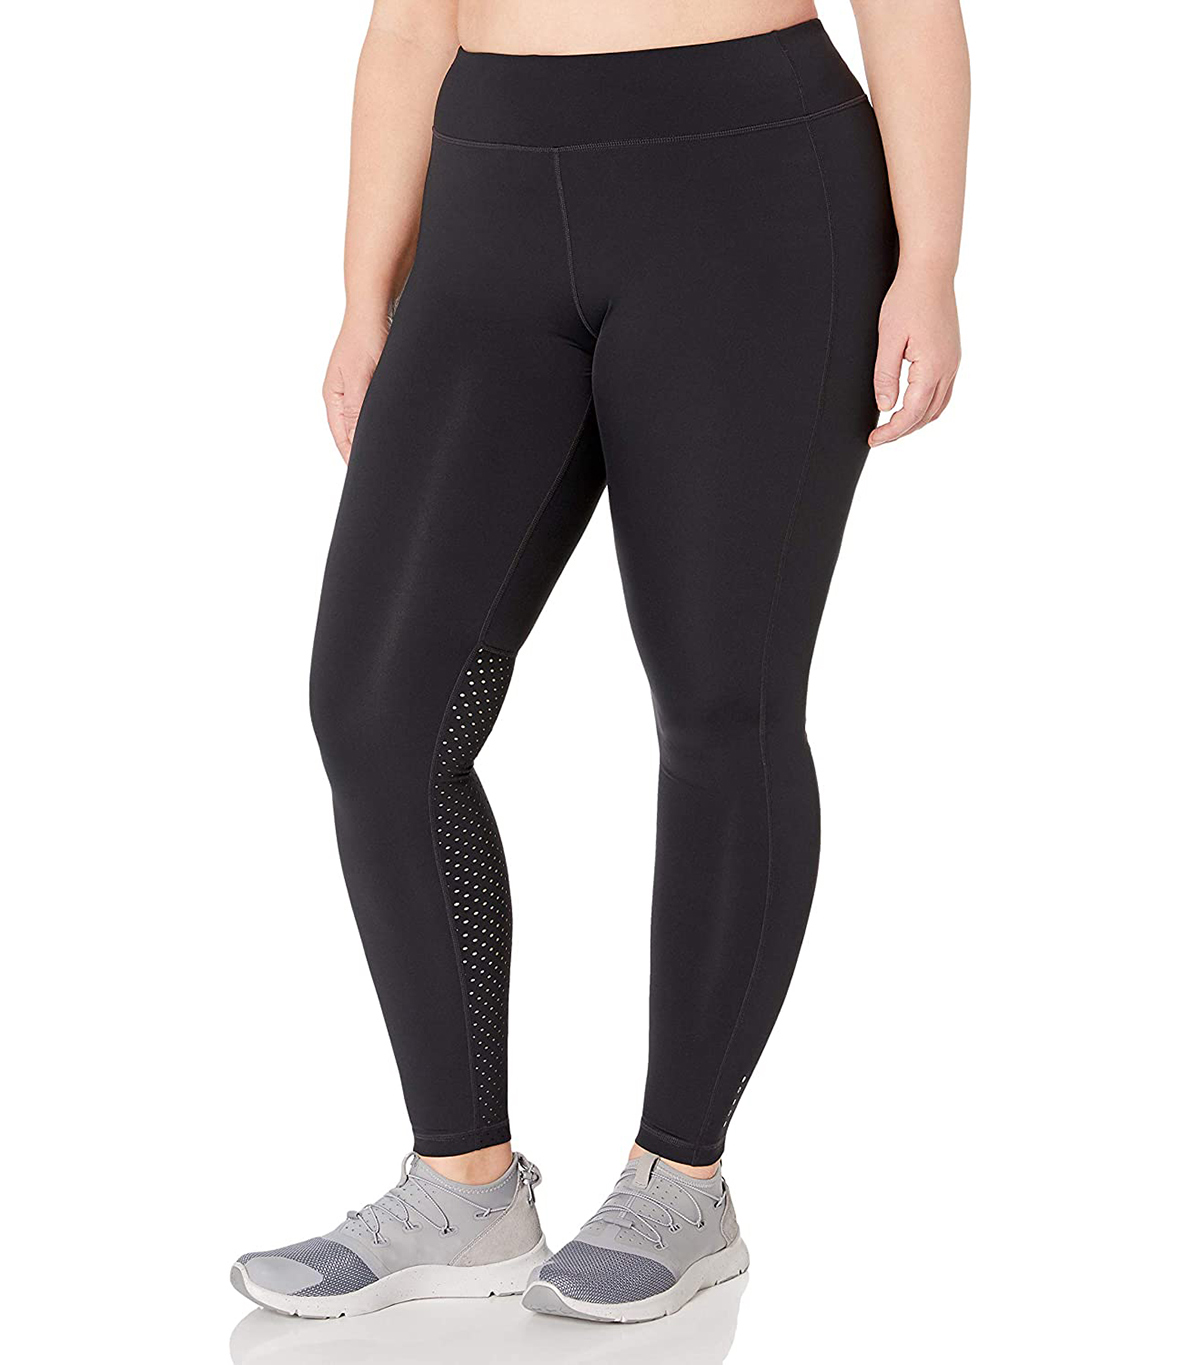 This Is the Best Pair of Under-$50 Leggings on Amazon | Who What Wear